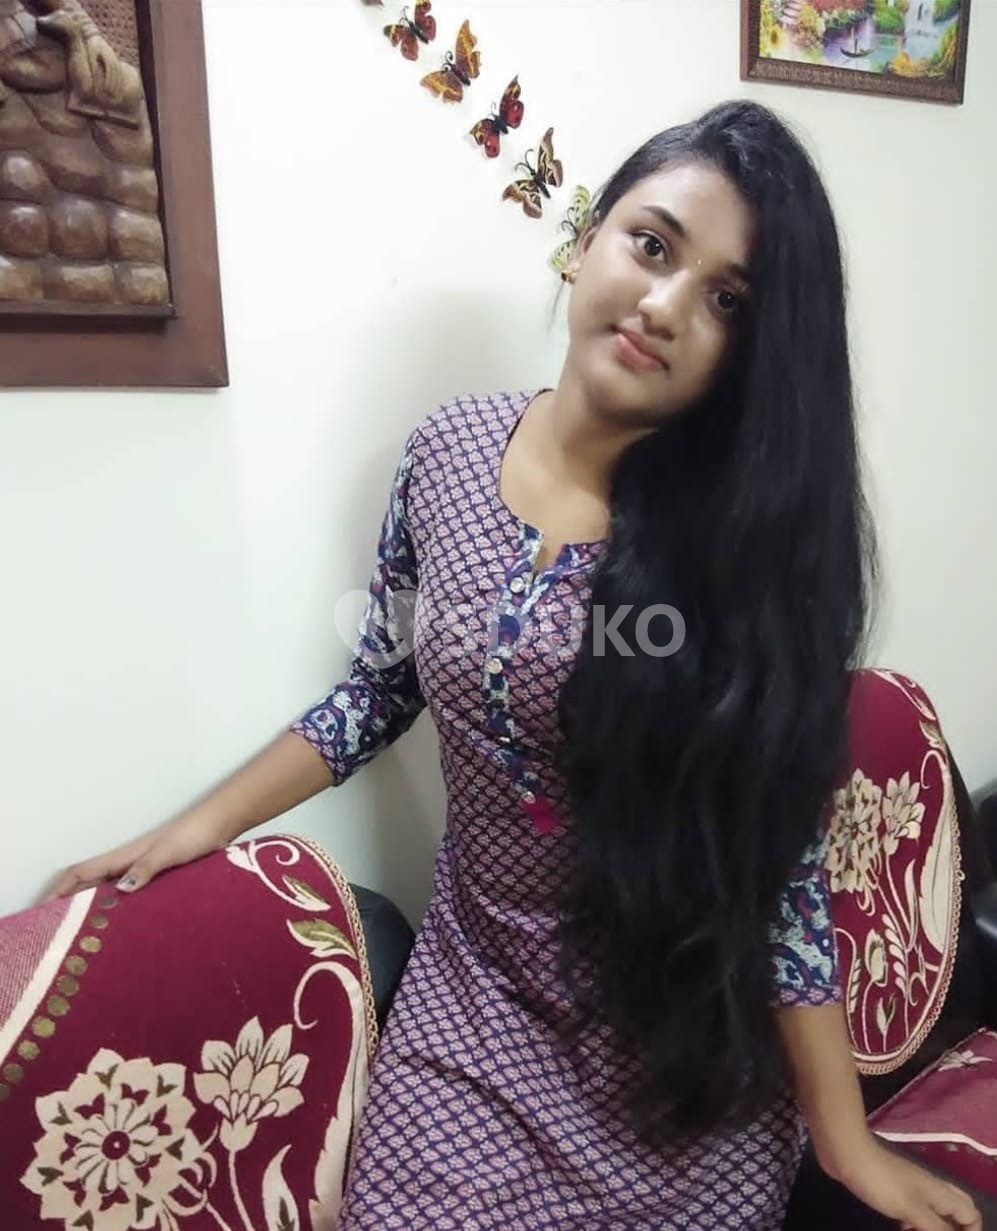 KORAMANGALA 💯 % FULLY SATISFACTION AND. DOORSTEP INCALL OUTCALL SERVICE AVAILABLE SAFE AND SECURE..